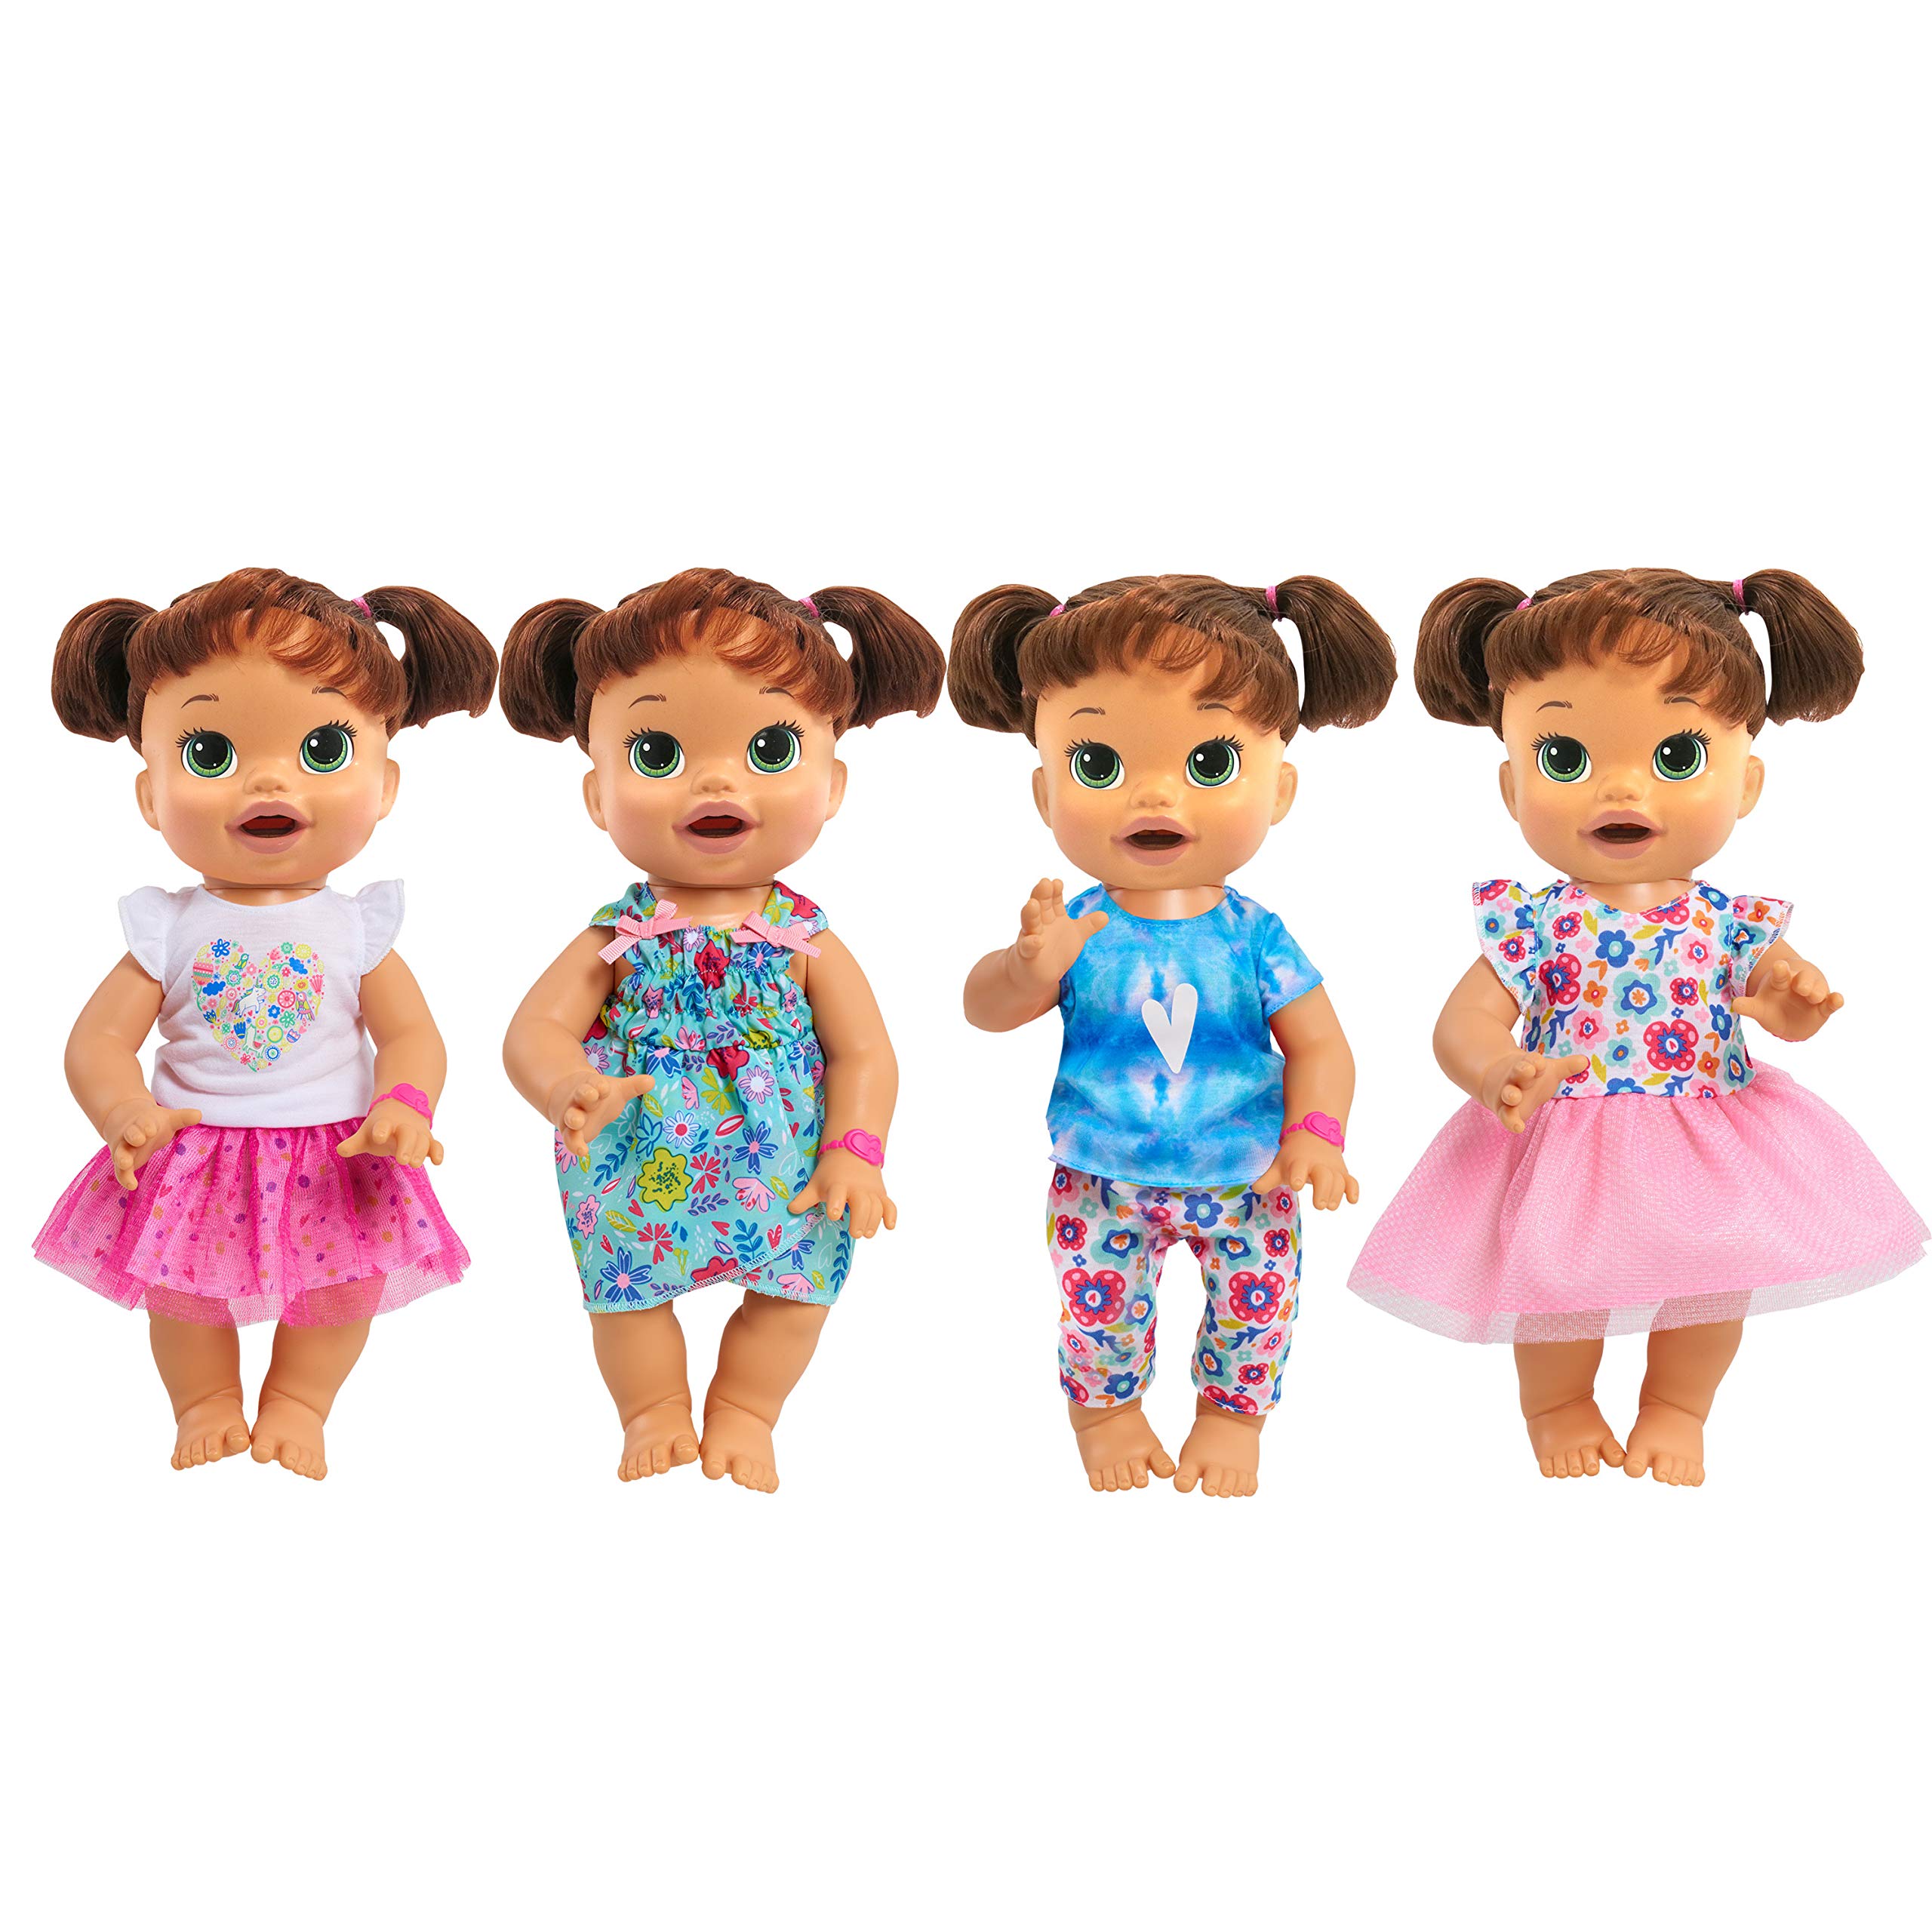 Mua Just Play Baby Alive Single Outfit Set, Floral Dress for Baby Dolls,  Teal with Flowers, Doll Not Included trên Amazon Mỹ chính hãng 2023 |  Giaonhan247